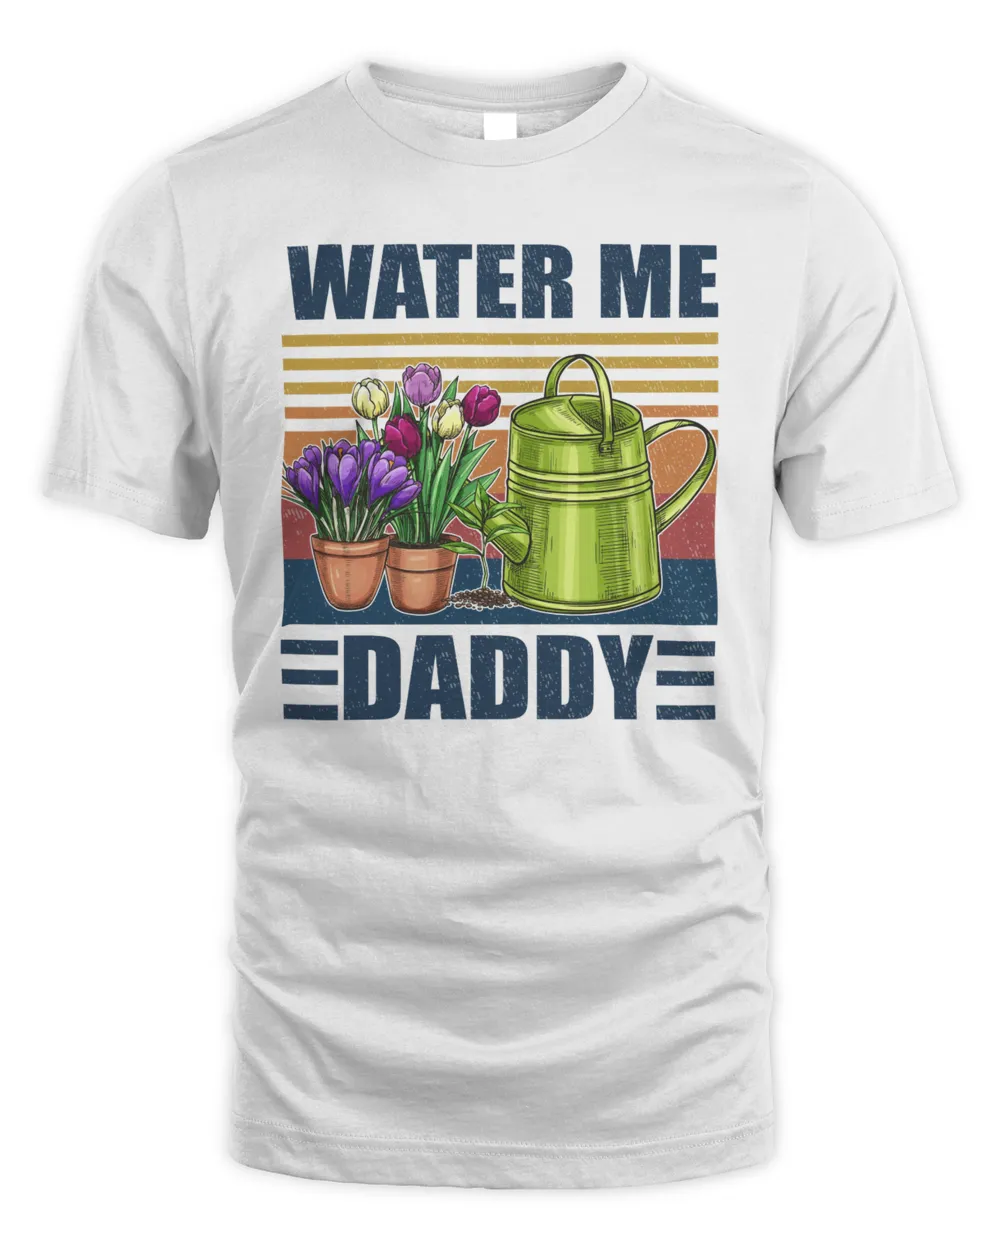 Funny water me daddy